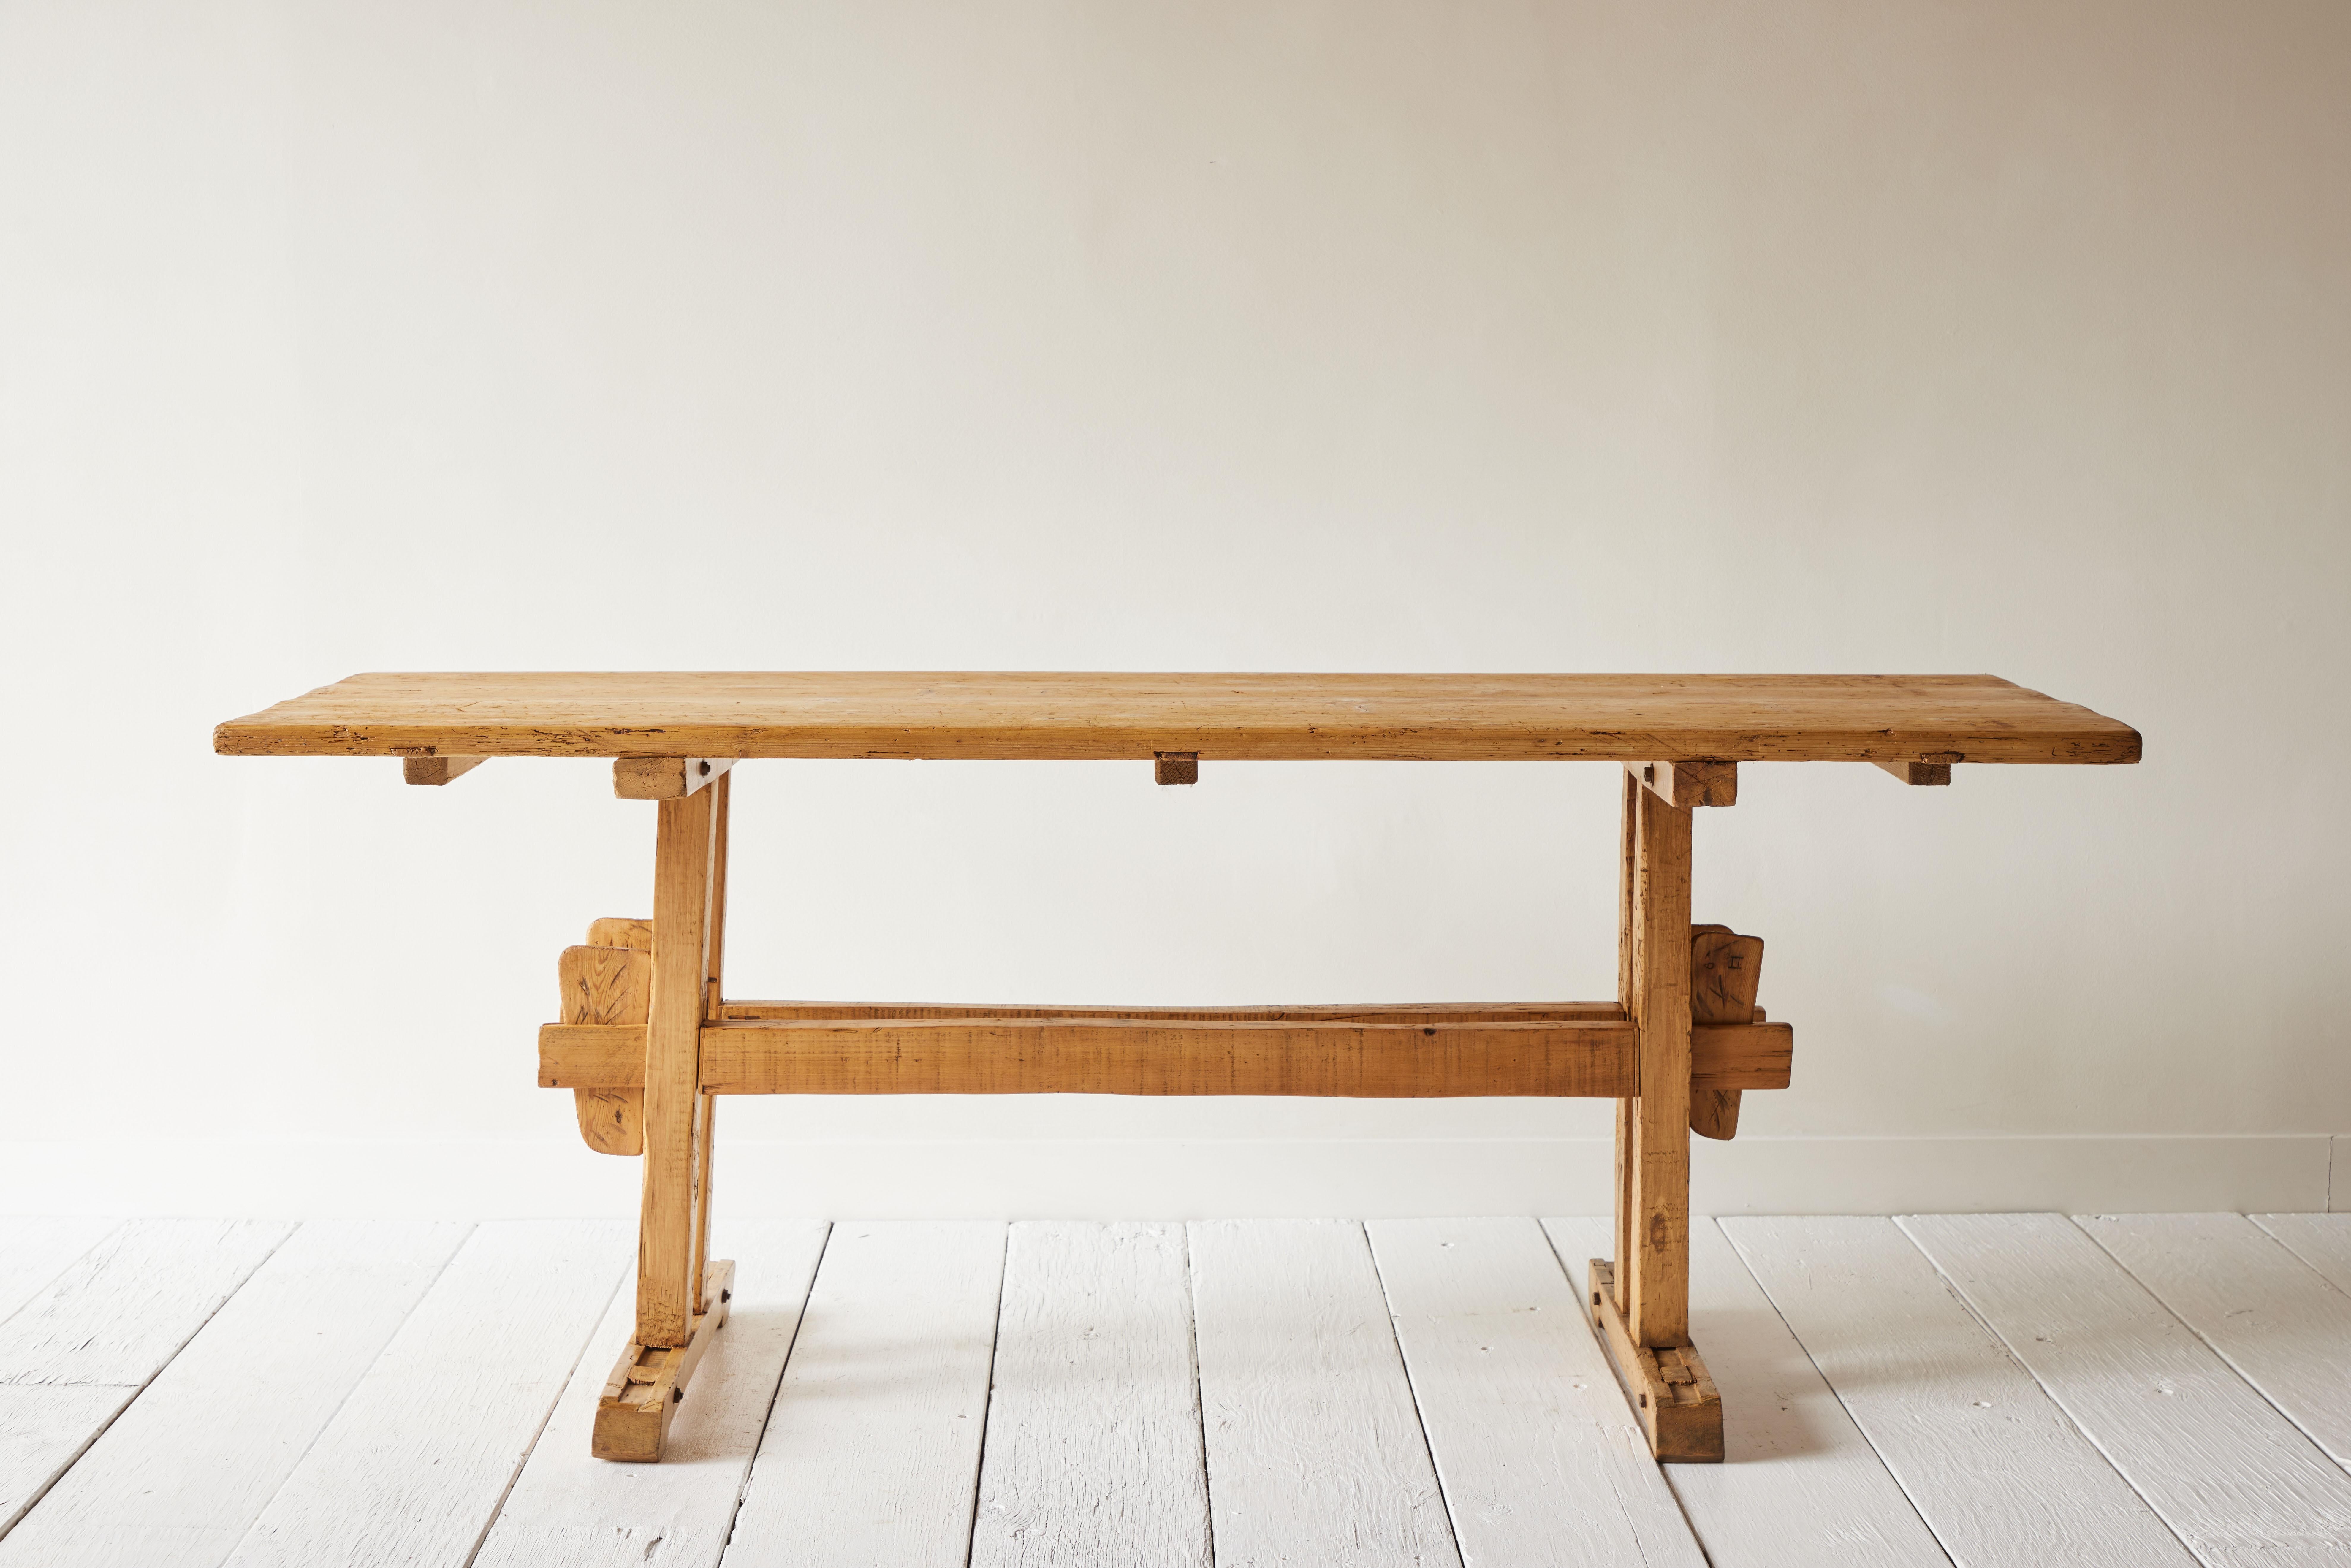 Trestle tables such as this were used during harvest season to feed the additional farm workers on hand to bring in the crops. The trestle base made it easy to take apart, transport and assemble quickly and easily. This pine trestle table is in